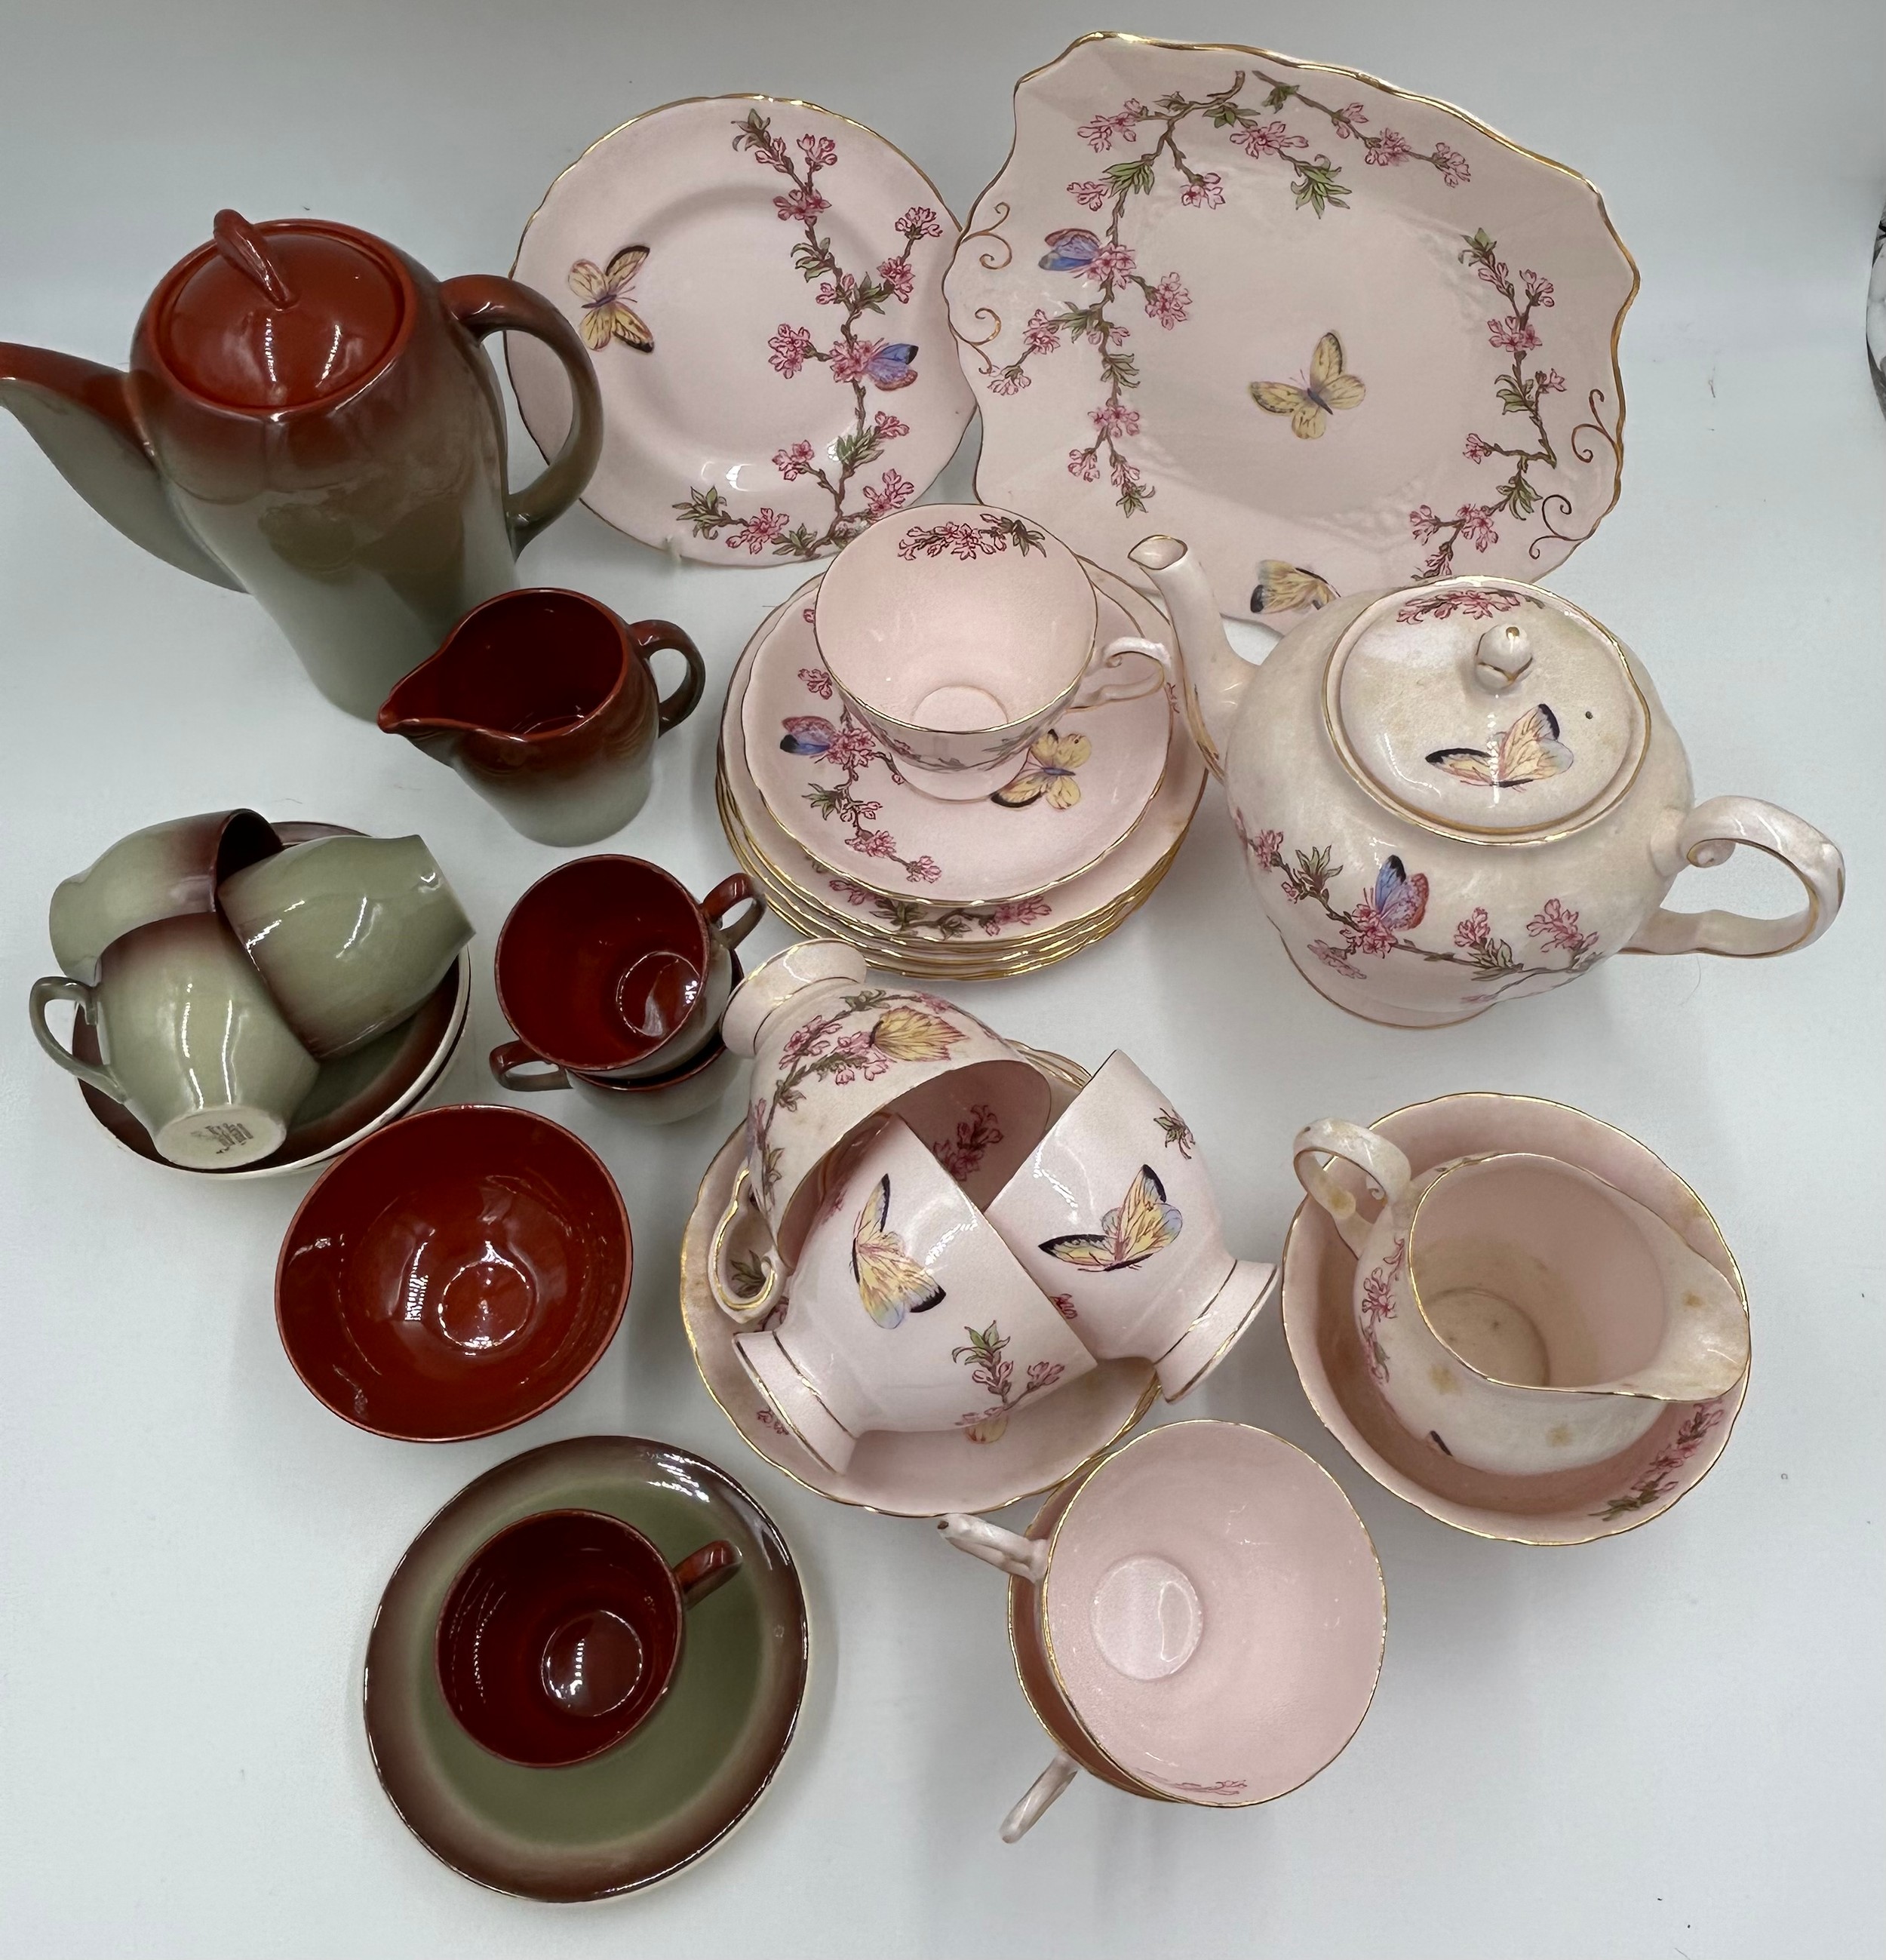 A pink Tuscan bone china tea service with blossom and butterfly pattern (teapot, milk, sugar, 6 x - Bild 3 aus 9